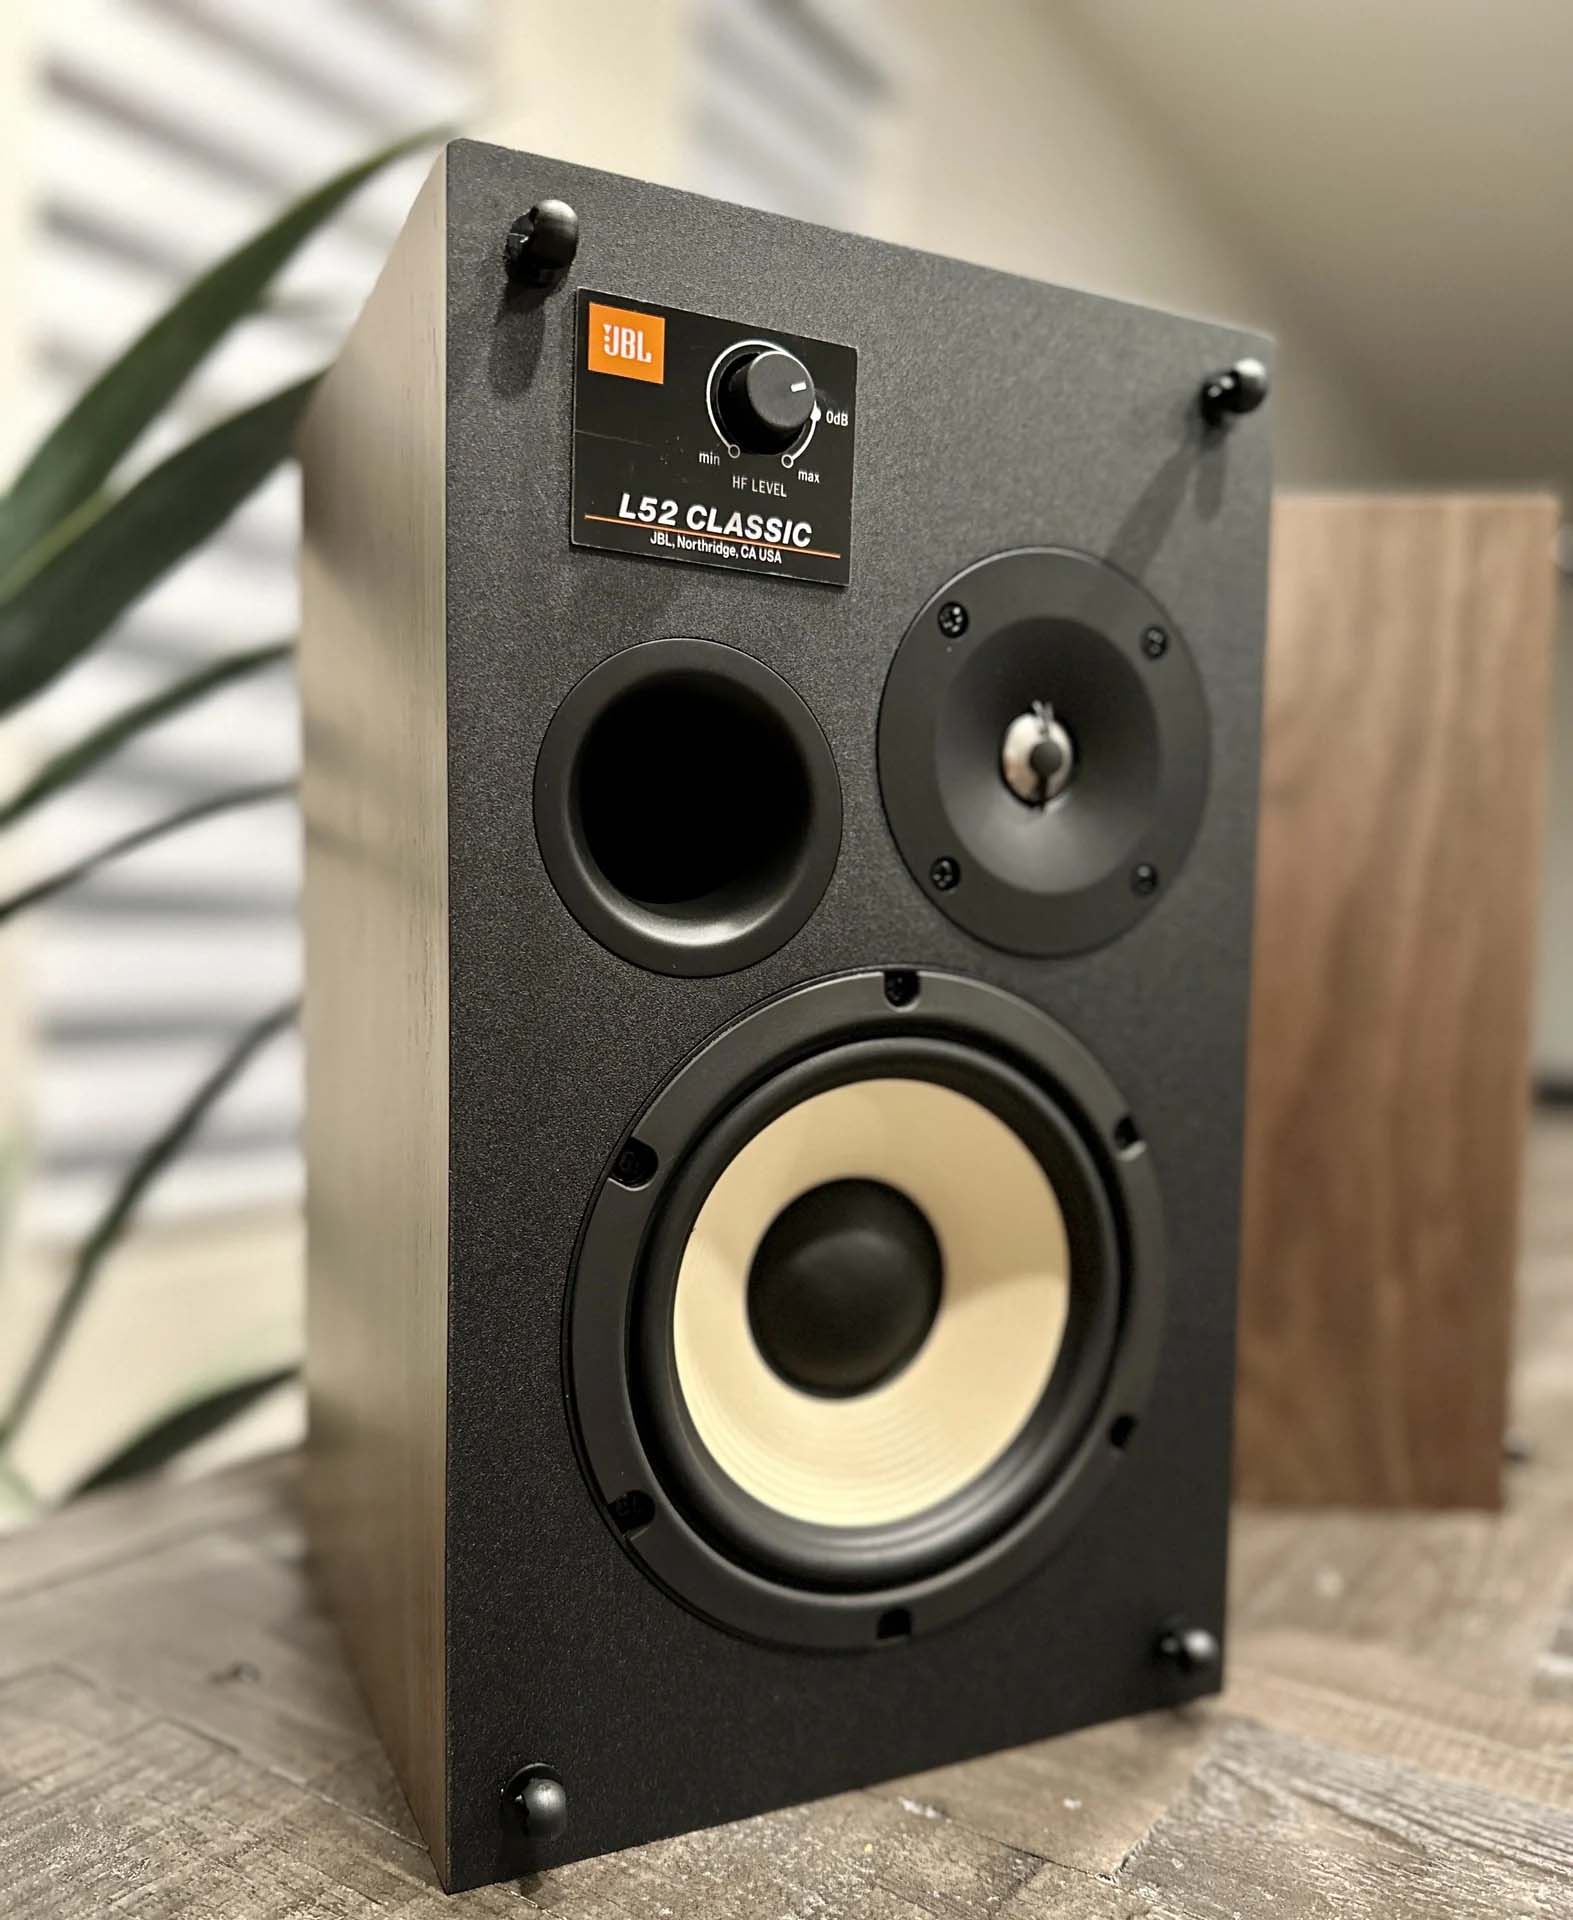 HARMAN Luxury Audio Introduces JBL Stage Architectural Series Loudspeakers  With Visually Discreet, High-Performance Sound